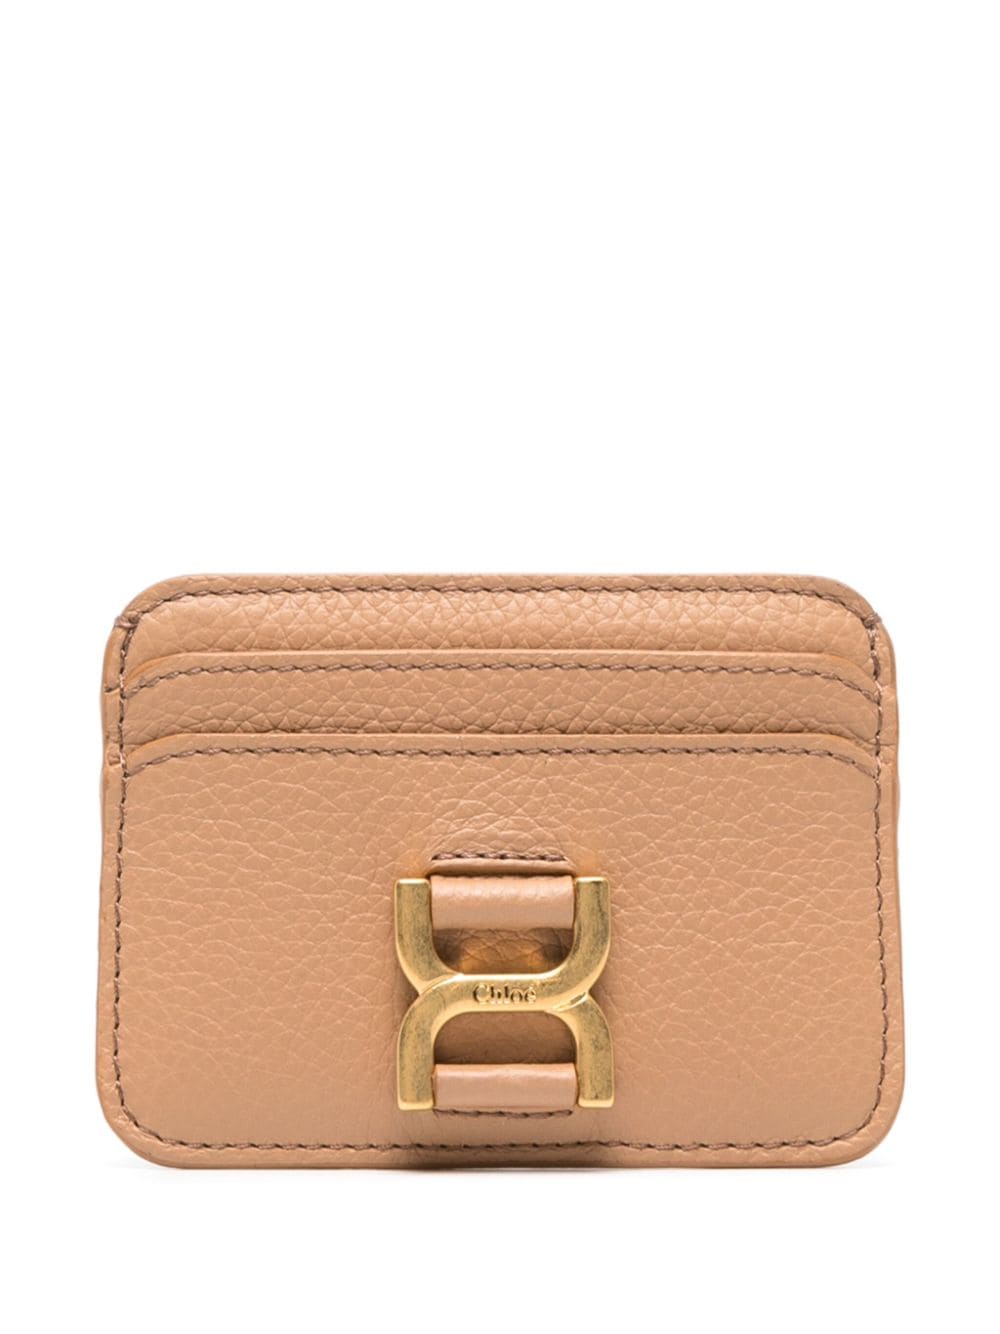 See by Chloé Marcie leather cardholder - Neutrals von See by Chloé